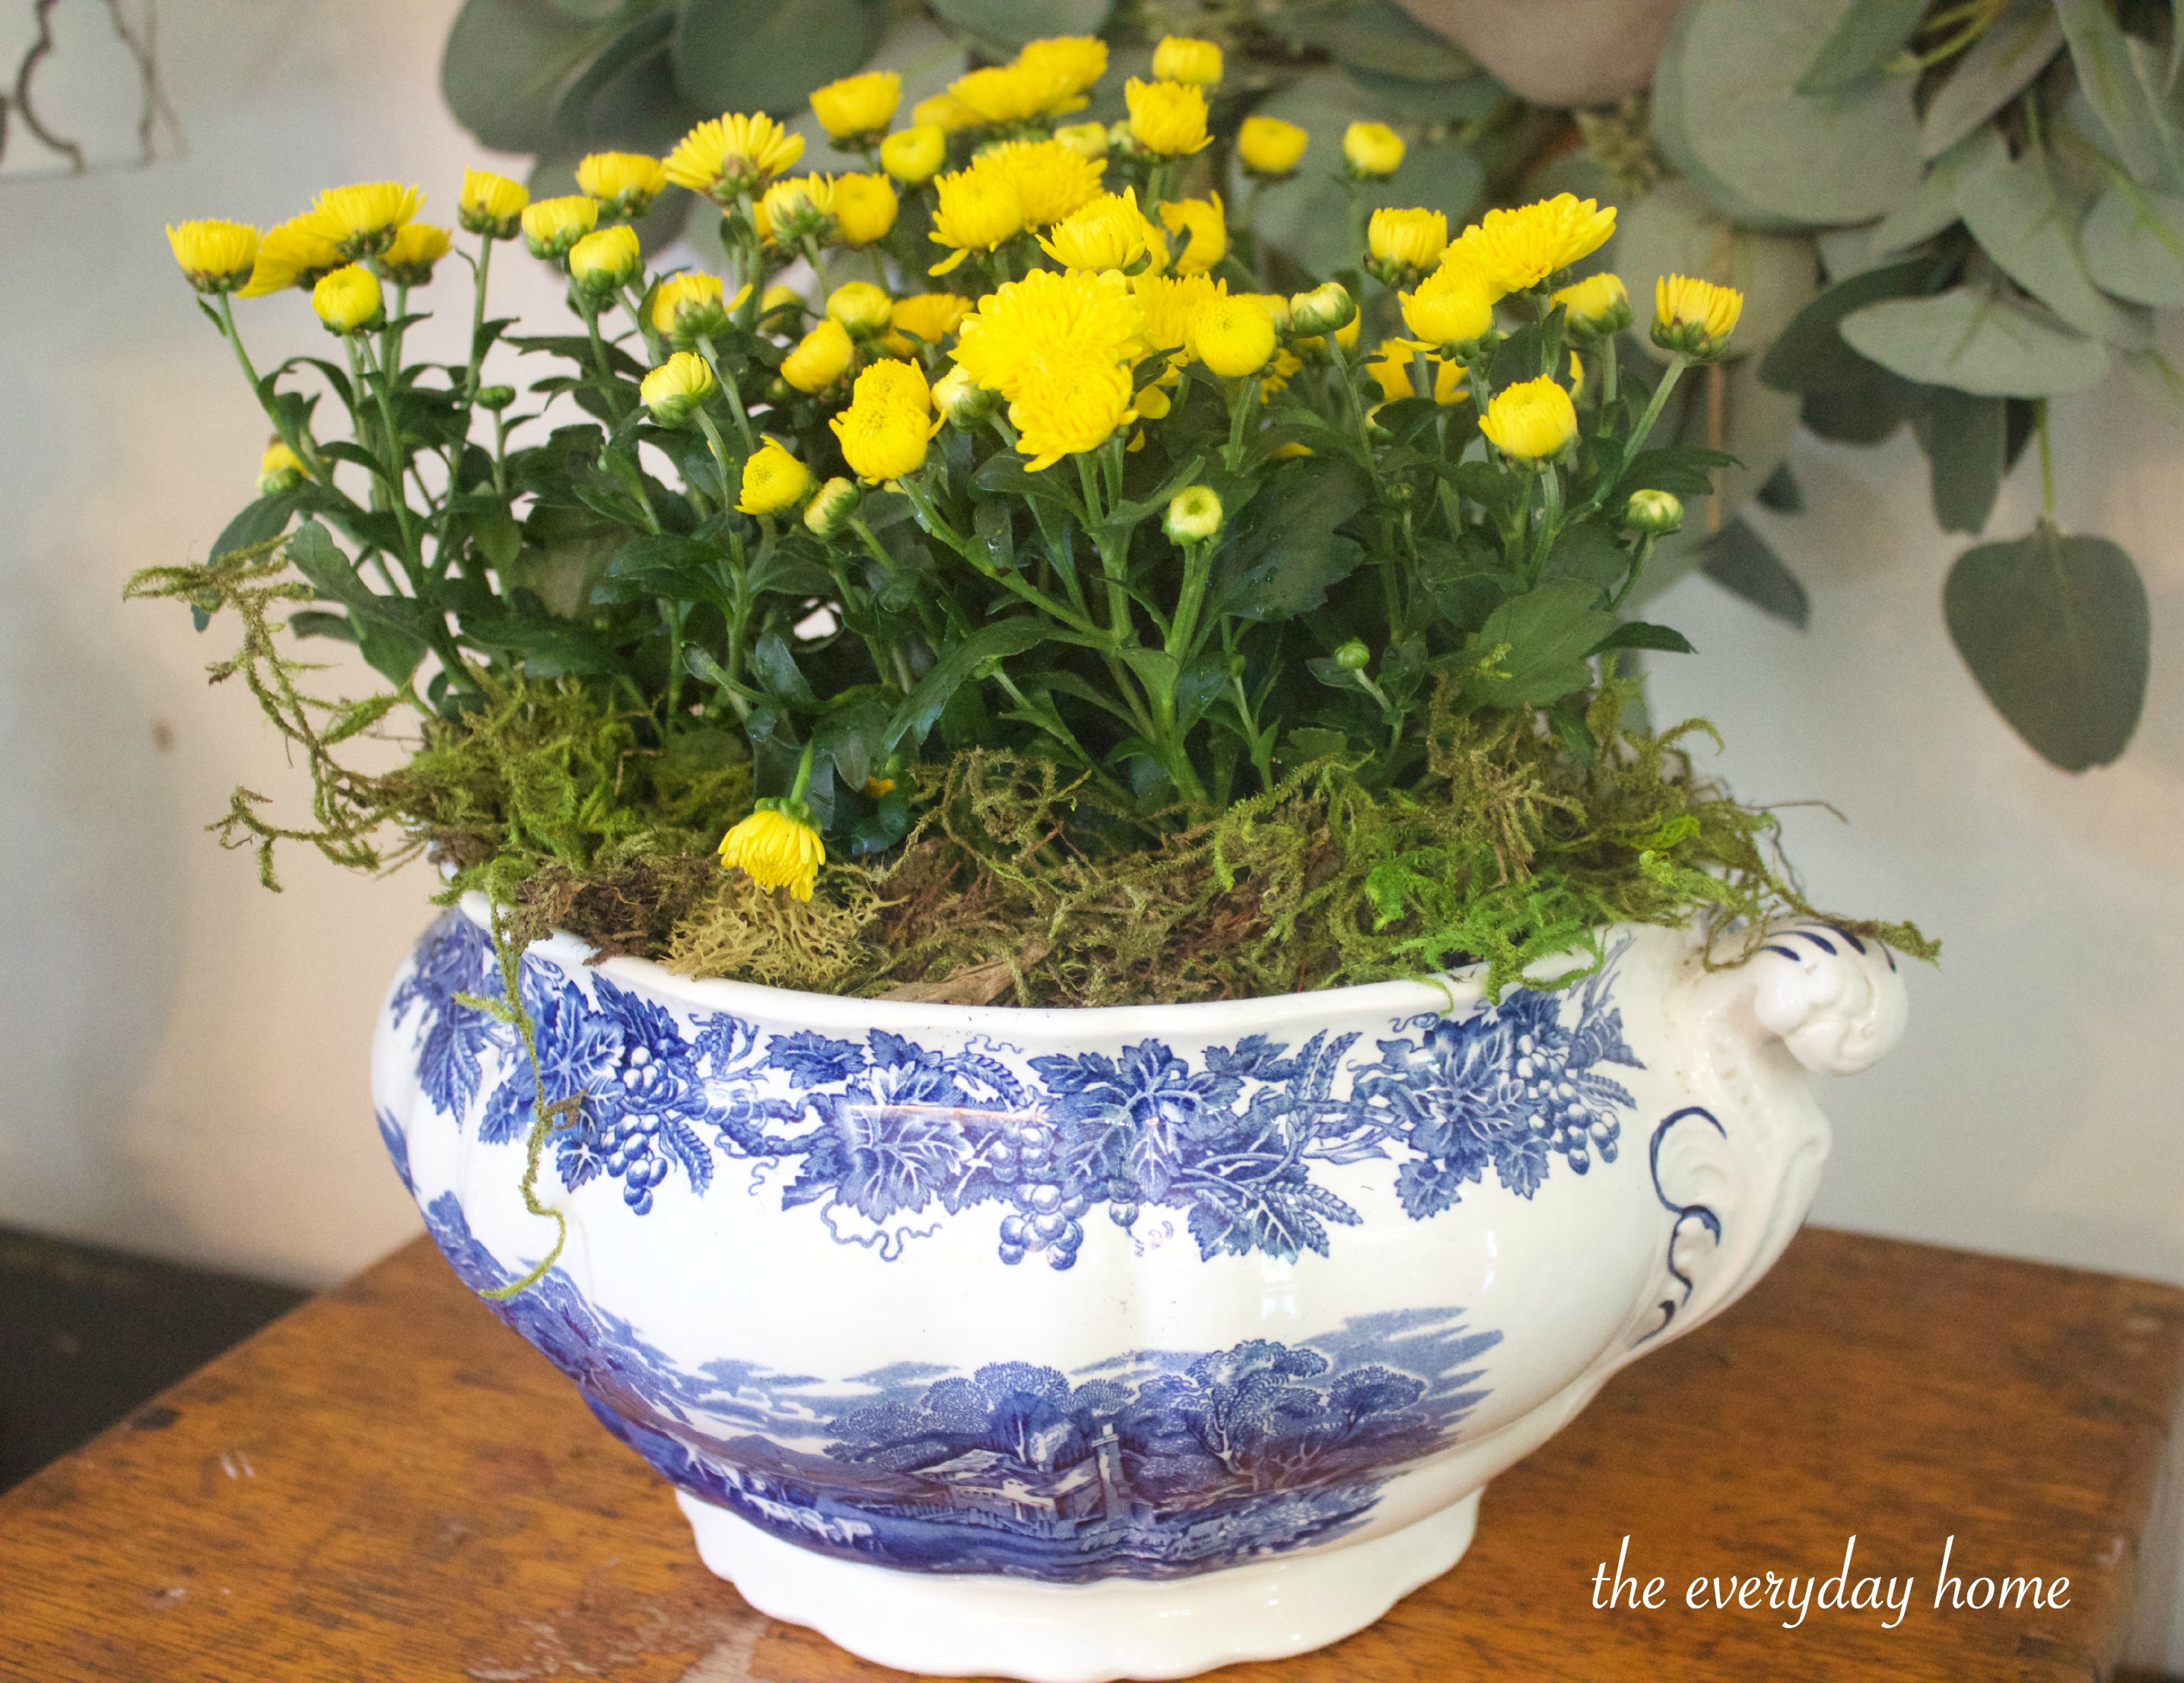 Yellow Mums in Blue Bowl The Everyday Home www.everydayhomeblog.com